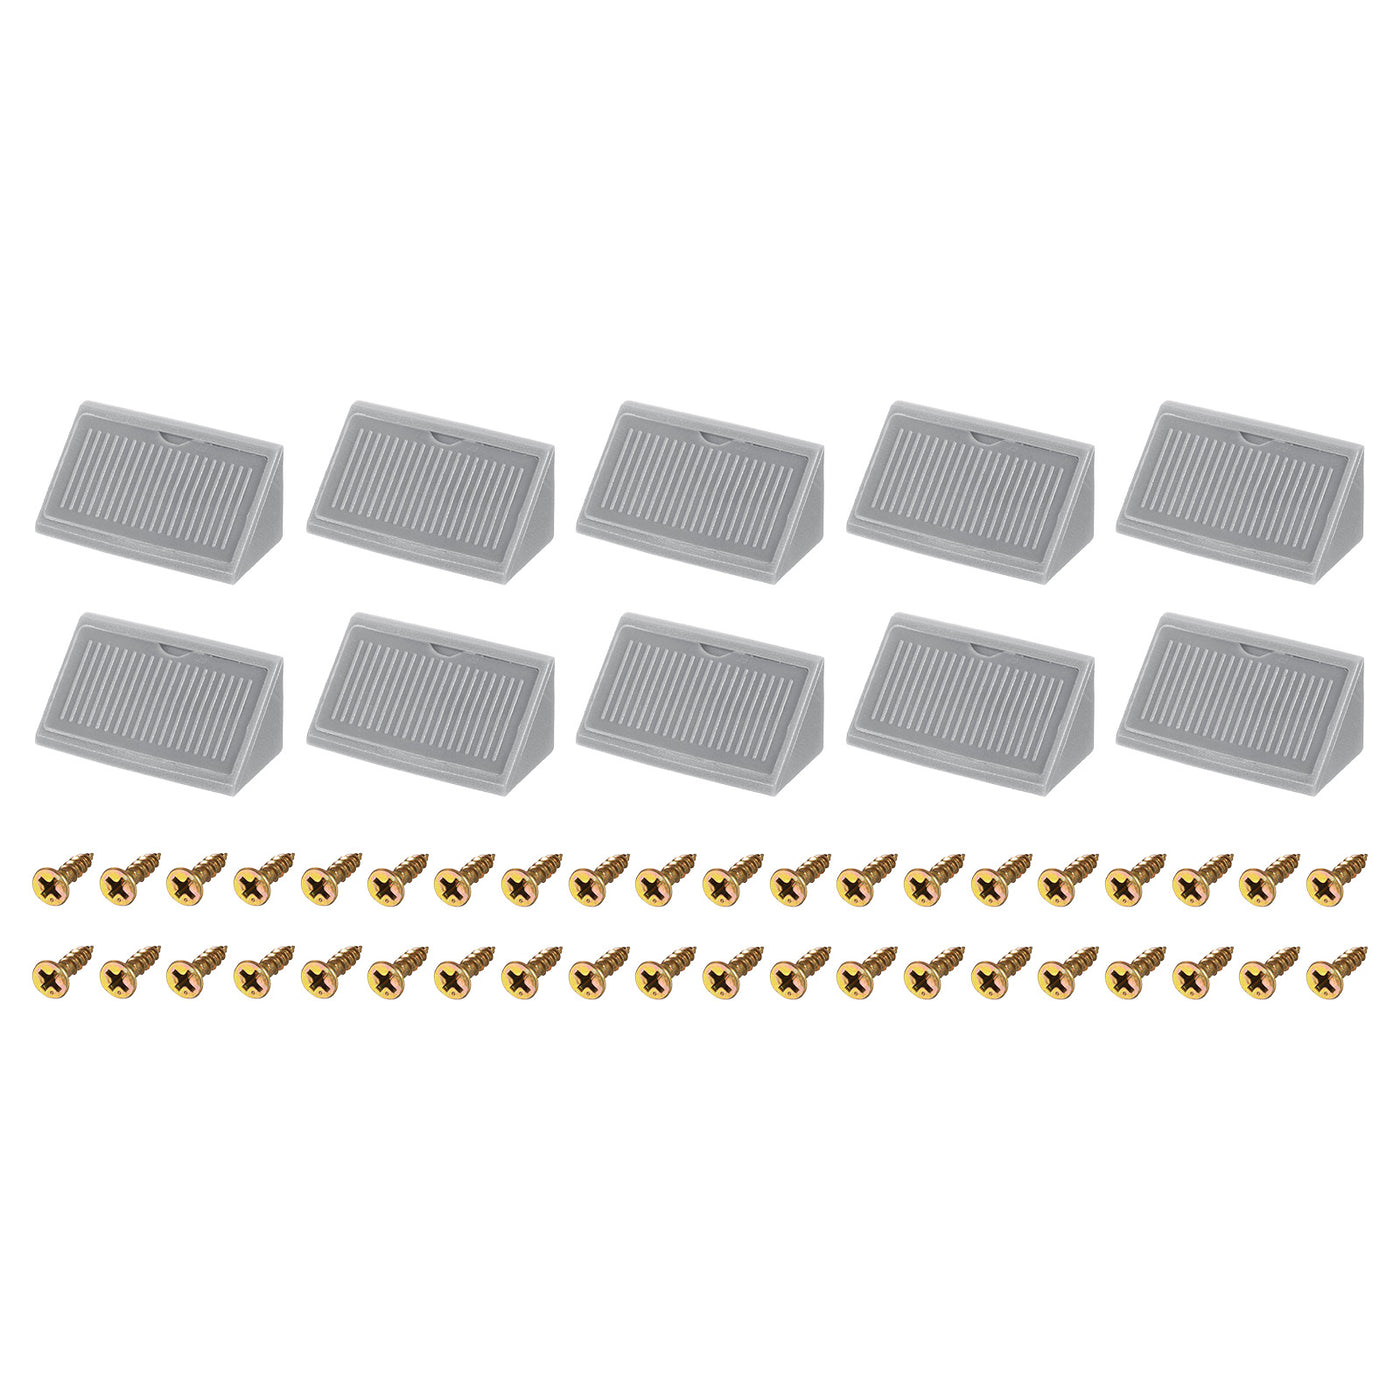 uxcell Uxcell 10Pcs 90 Degree Plastic Corner Braces with Cover Cap, 41x19x19mm Nylon Shelf Right Angle Brackets with Screws for Cabinets, Cupboards (Grey)